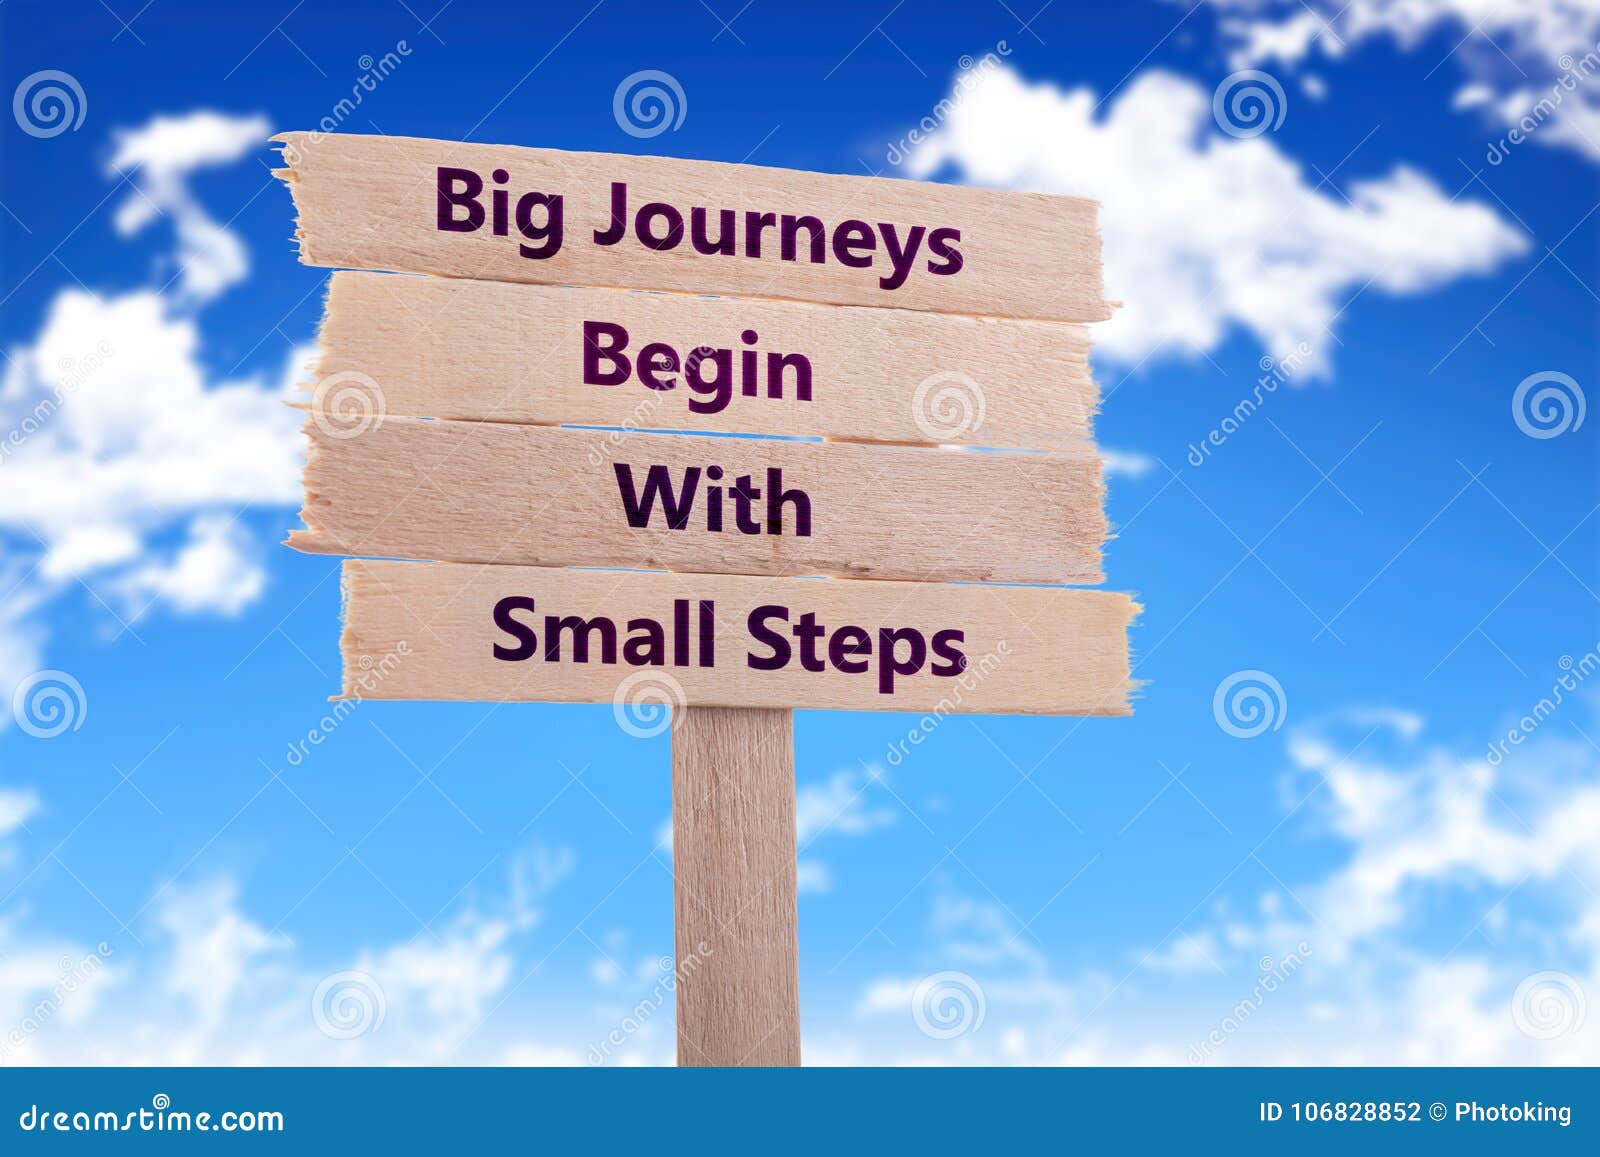 big journeys begin with small steps